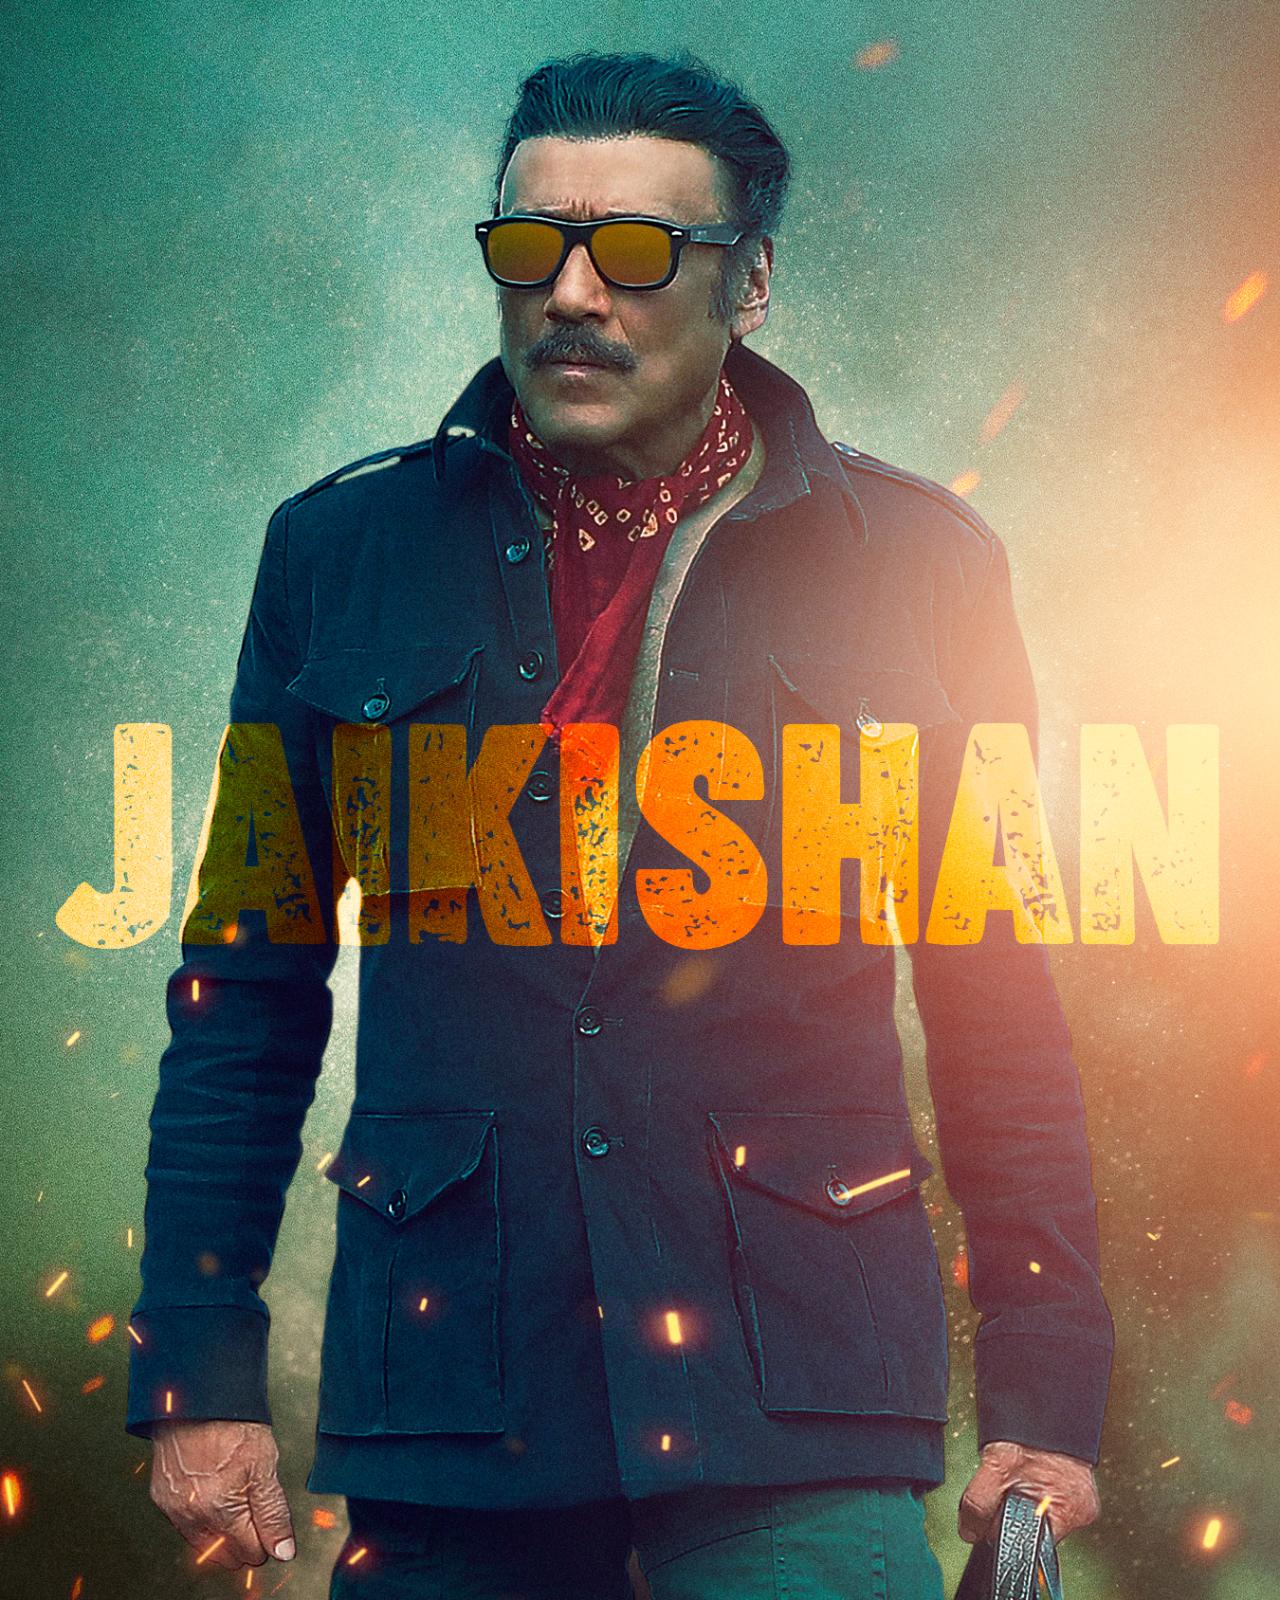 Jackie Shroff will be seen as Jaikishan. He, too, is seen in dark shades with a red neck scarf and blue overcoat